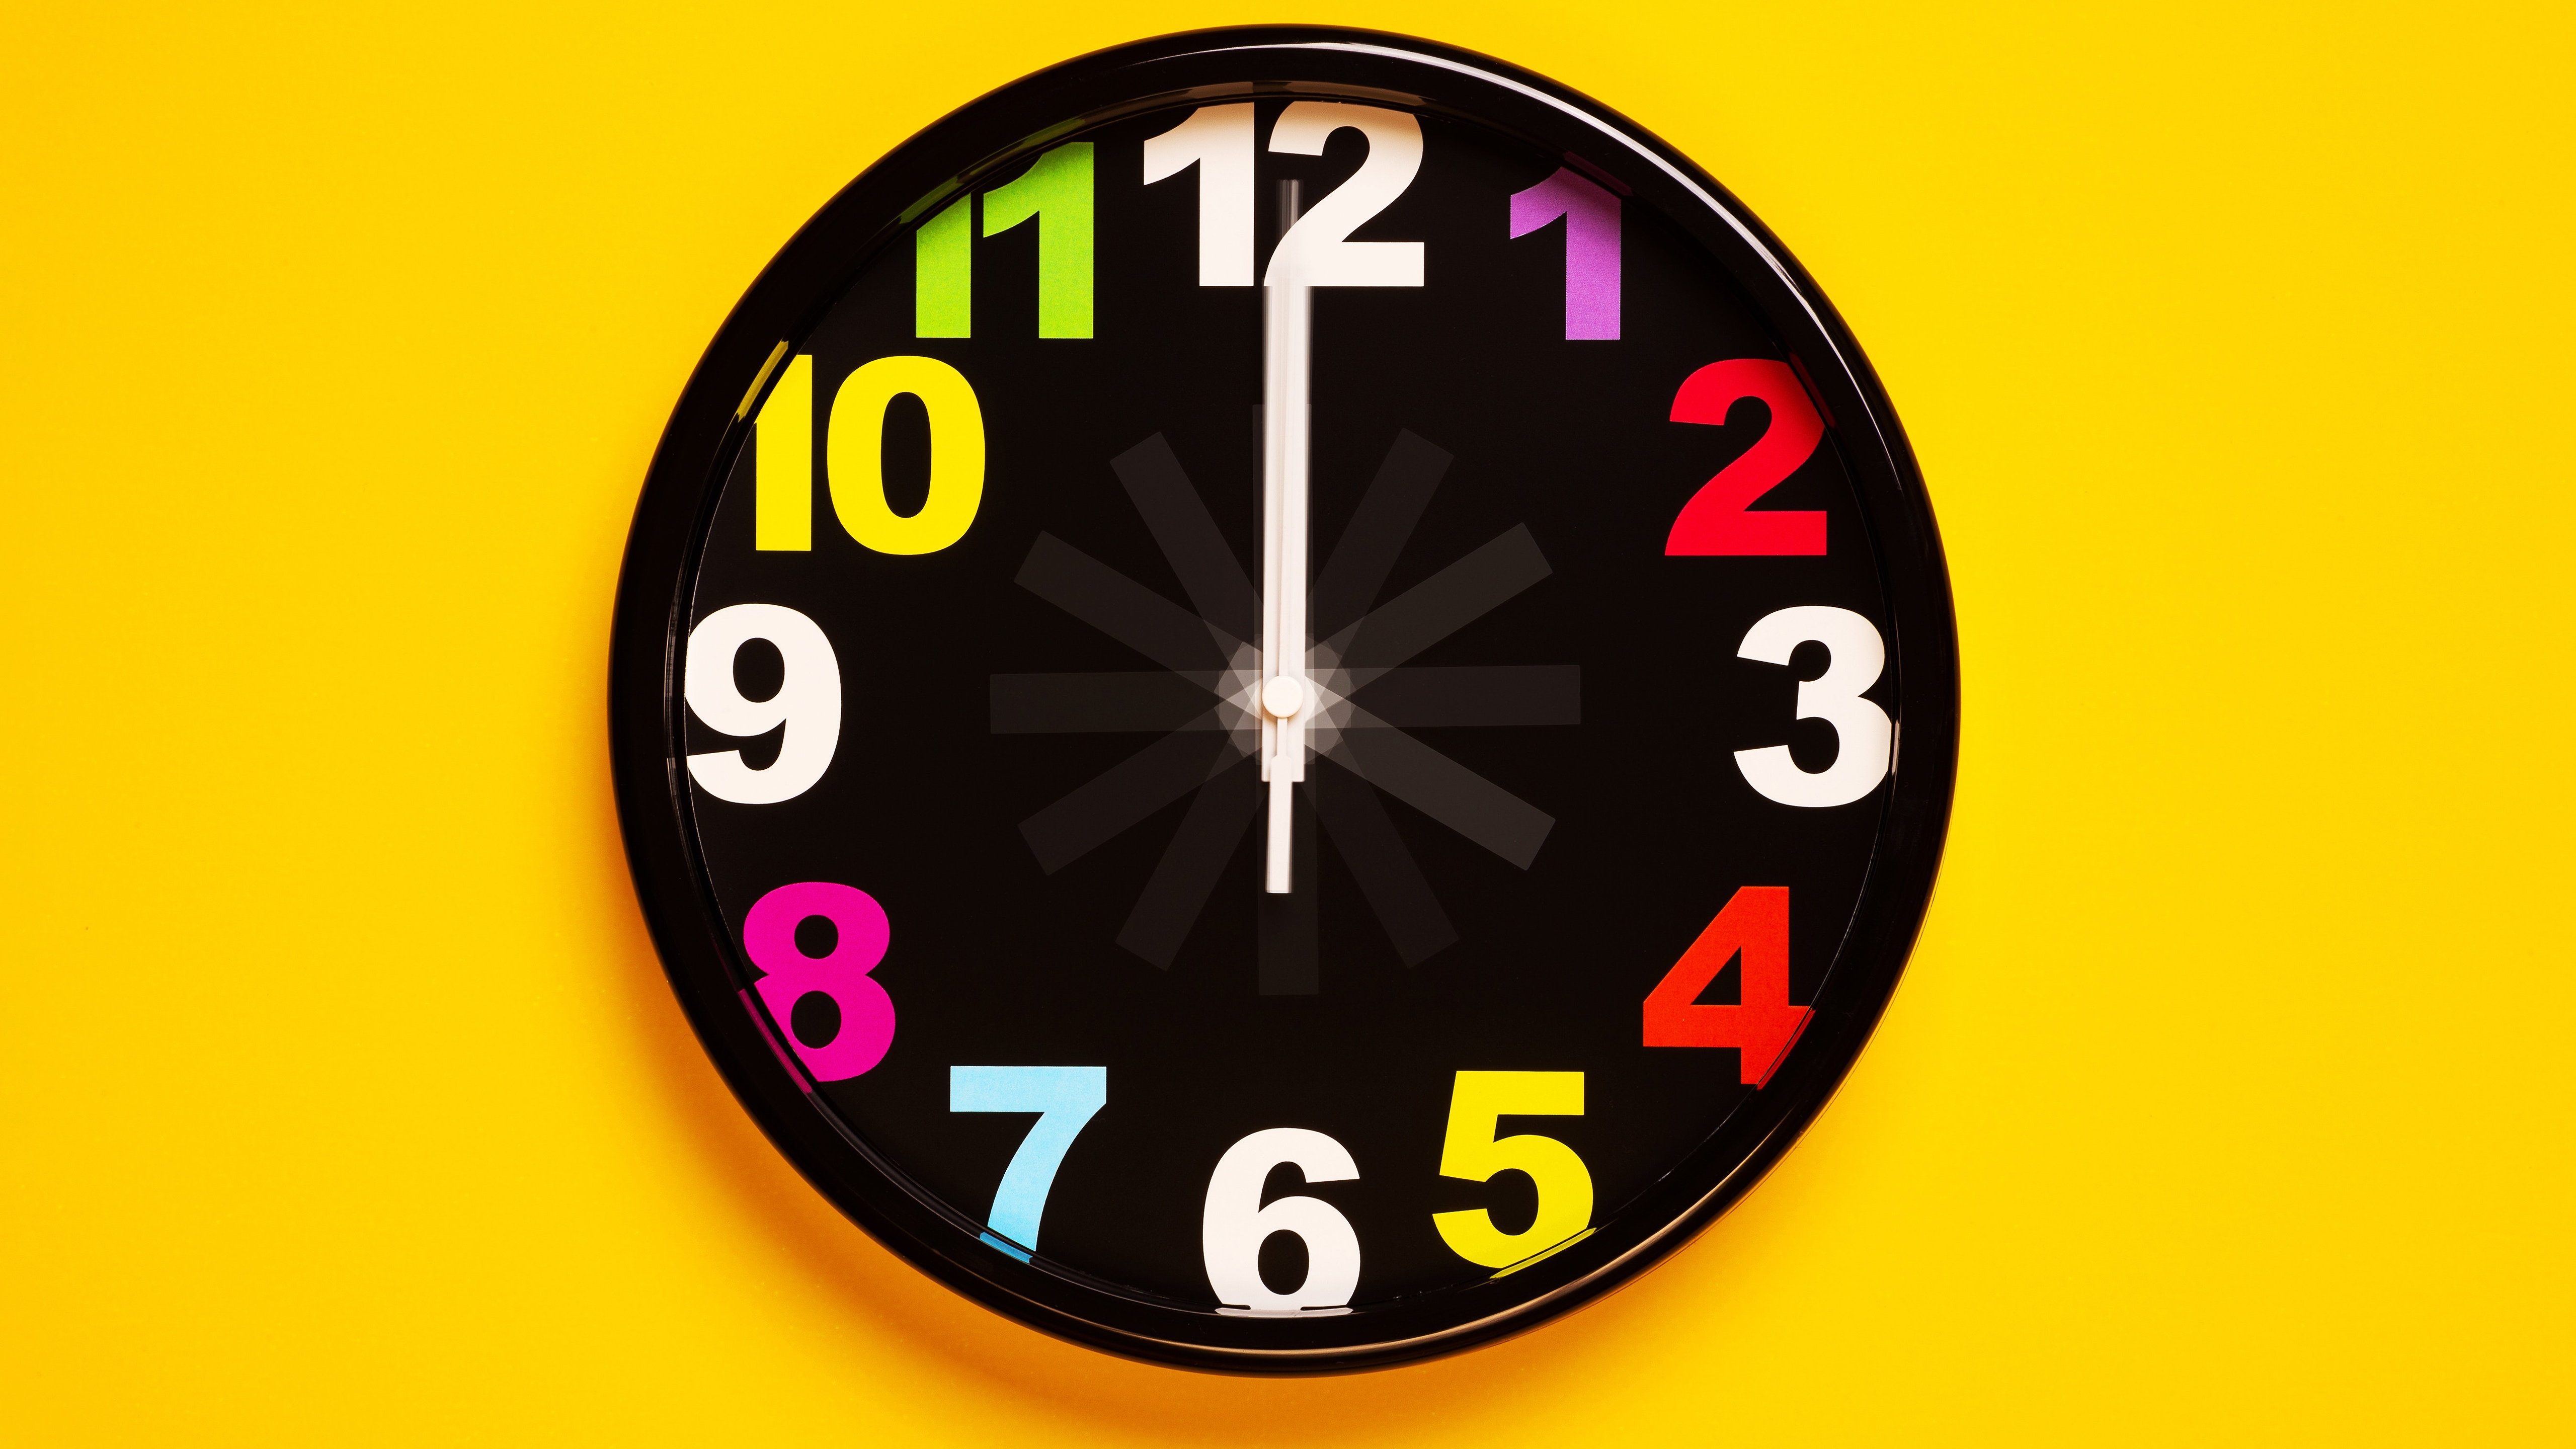 Wallpapers wallpaper colorful clock yellow wall yellow background on the desktop